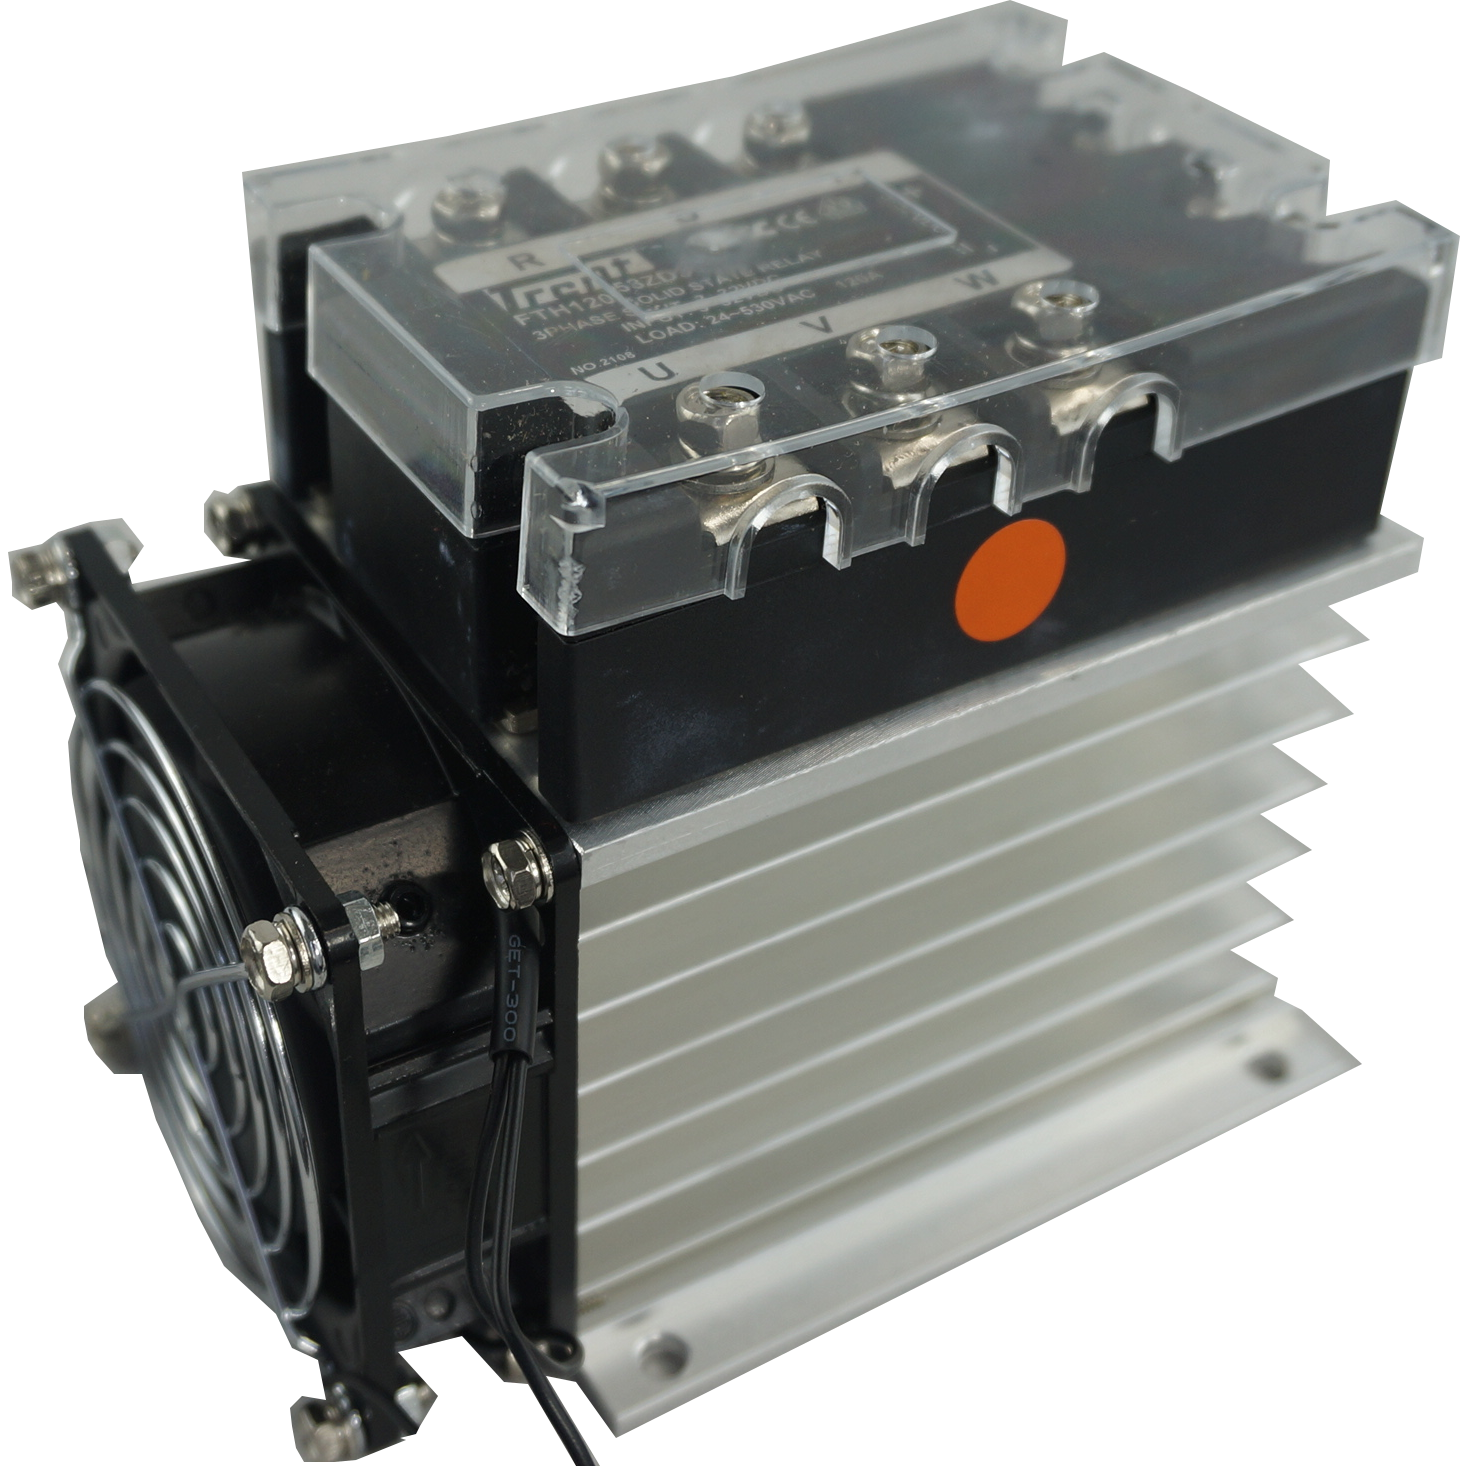 FTH6053ZD3 + HS212F, Solid State Relay, and Heatsink Assembly, 3 Phase 3-32VDC Control, 36 Amp per phase @ 40 Deg C, 48-530VAC Load, LED Status Indicator, with IP20 Cover